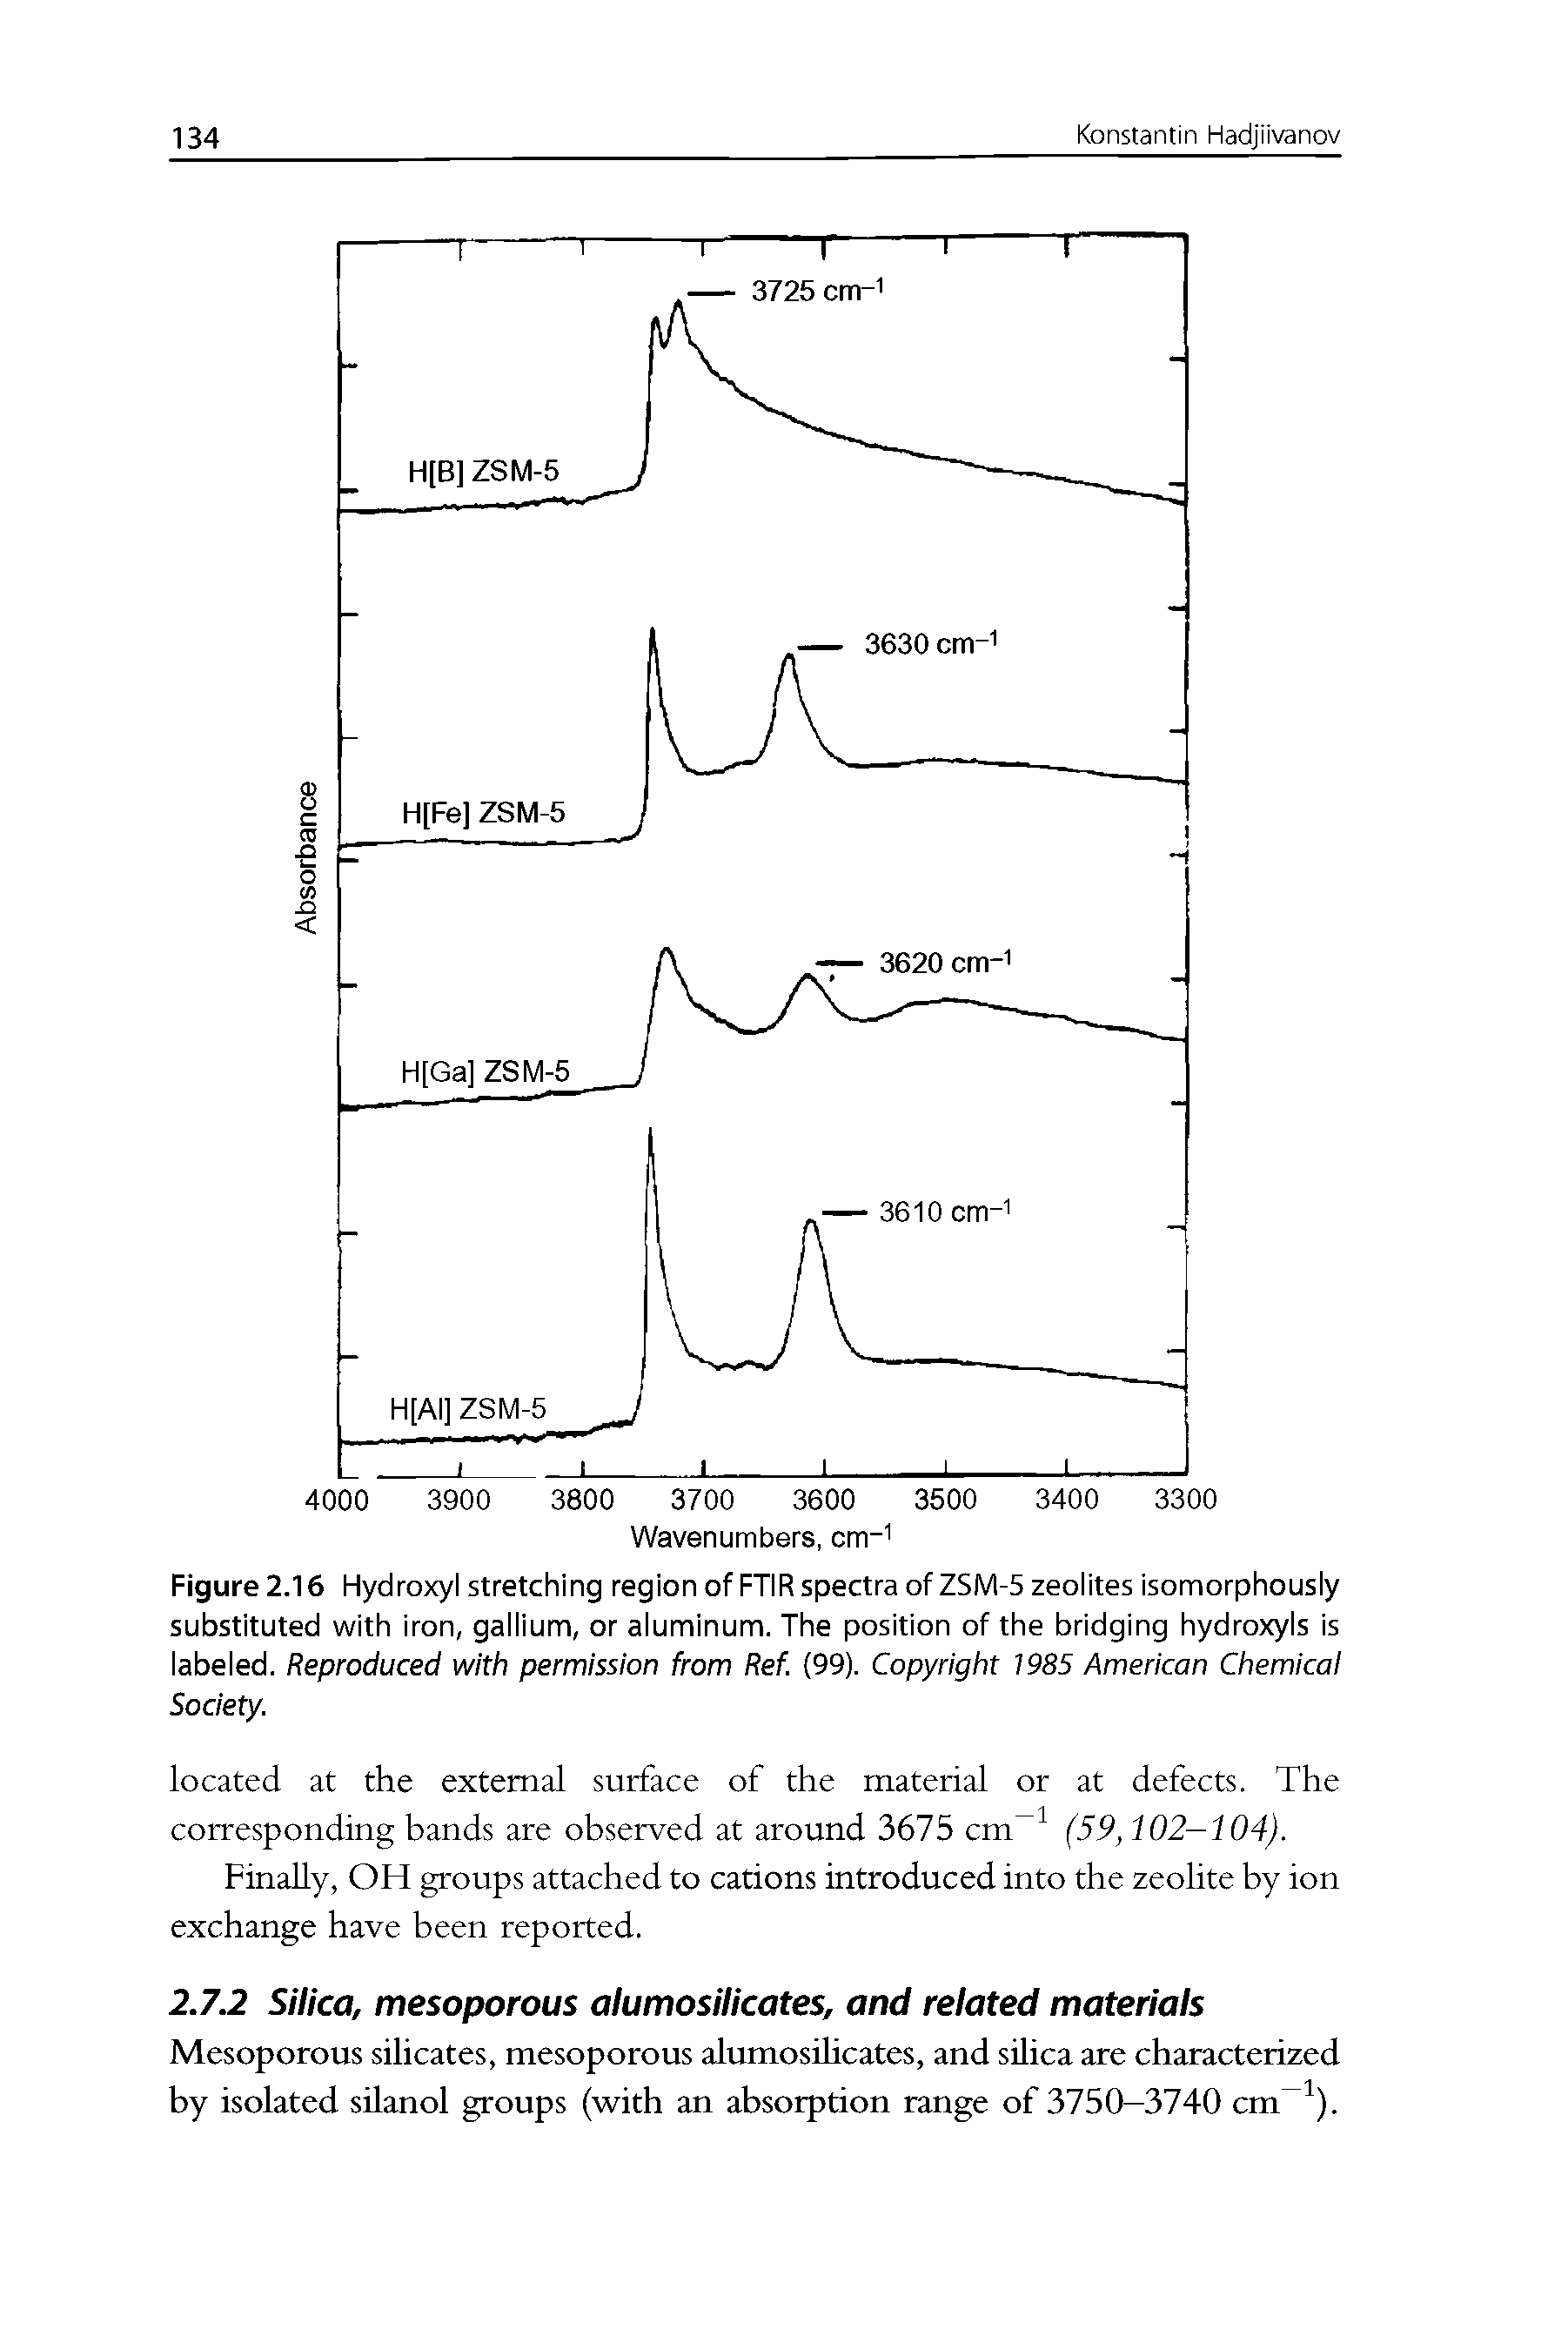 Figure 2.16 Hydroxyl stretching region of FTIR spectra of ZSIVI-5 zeolites isomorphously substituted with iron, gallium, or aluminum. The position of the bridging hydroxyls is labeled. Reproduced with permission from Ref. (99). Copyright 1985 American Chemical Society.